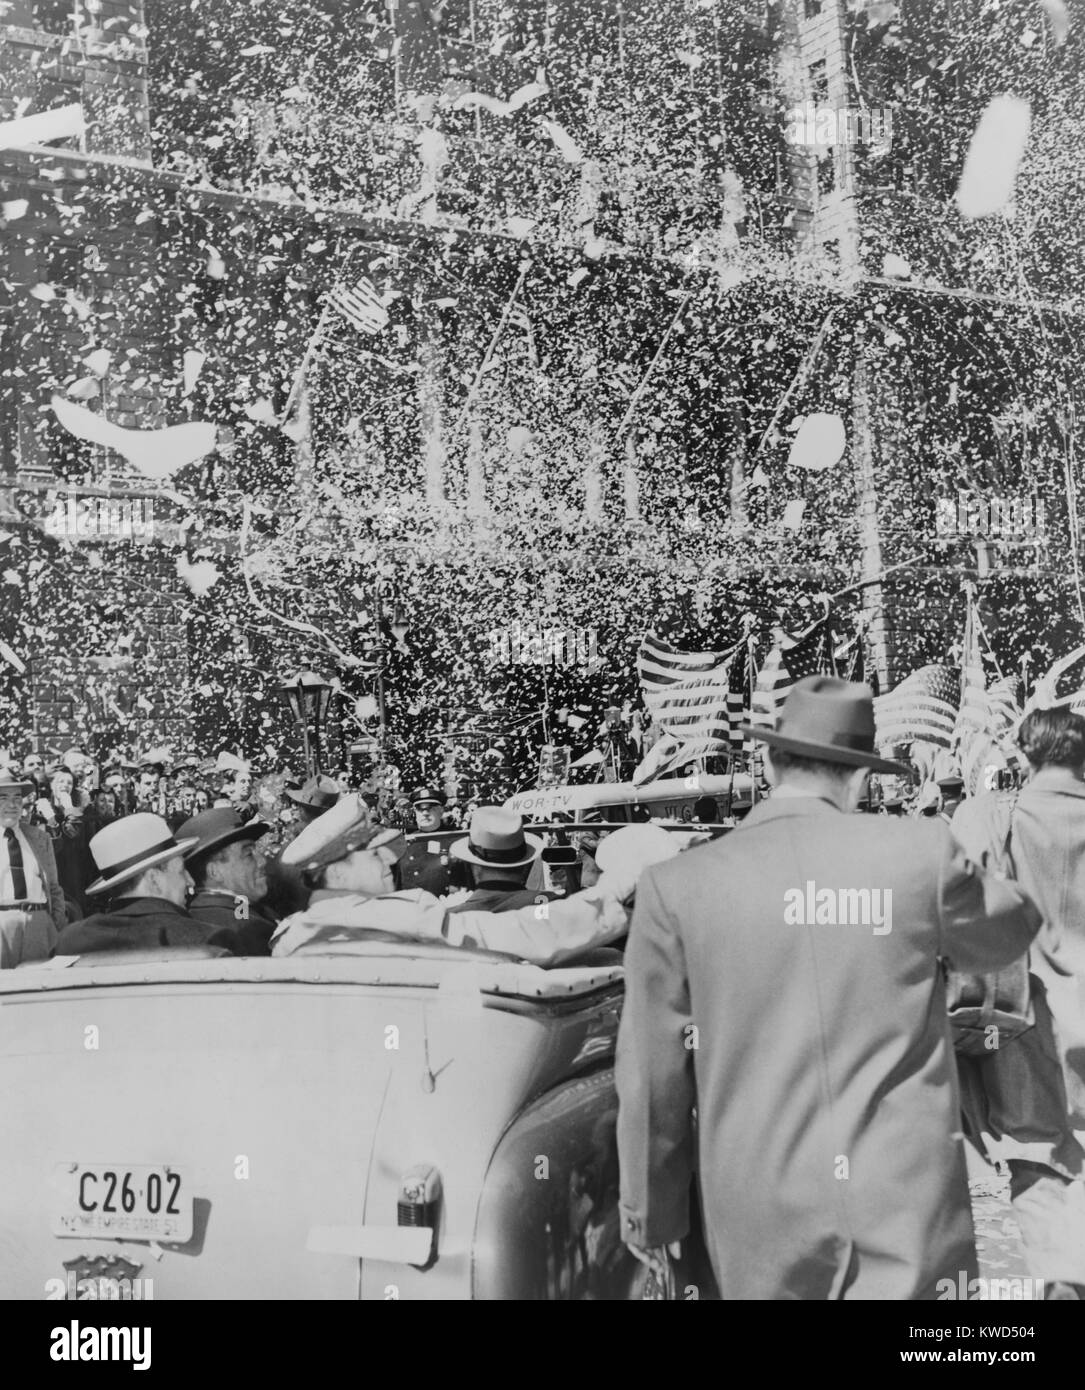 Gen. Douglas MacArthur sitting in the rear of an open car riding up Broadway during a ticker tape parade, New York City. April 20, 1951. An estimated 7 million cheered the General. (BSLOC 2014 11 140) Stock Photo